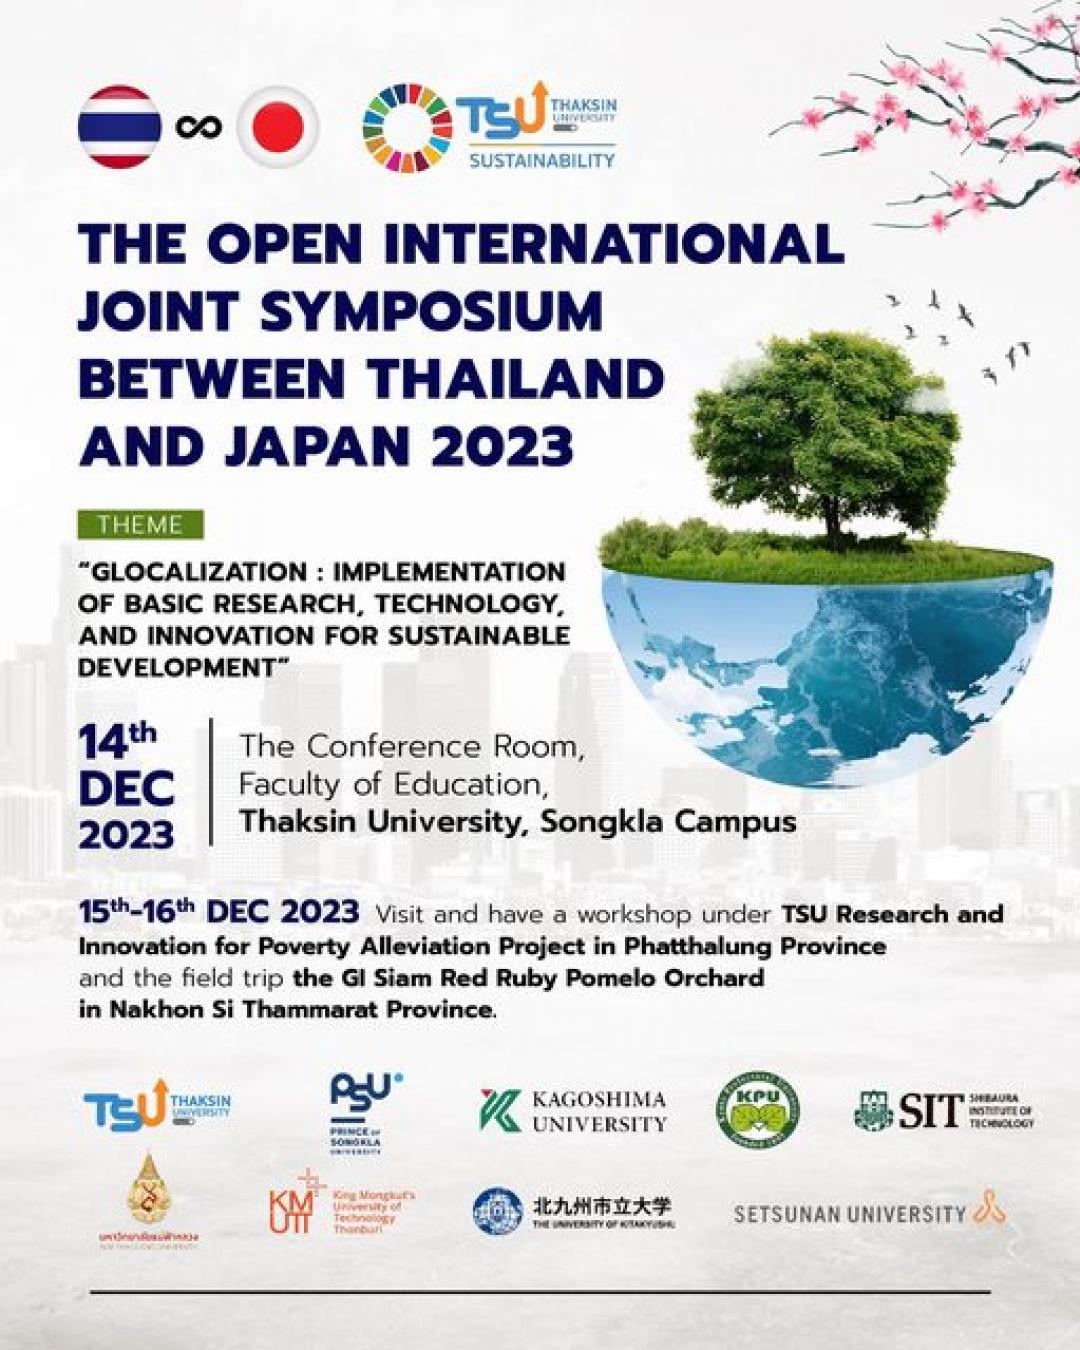 The Open International Joint Symposium between Thailand and Japan 2023